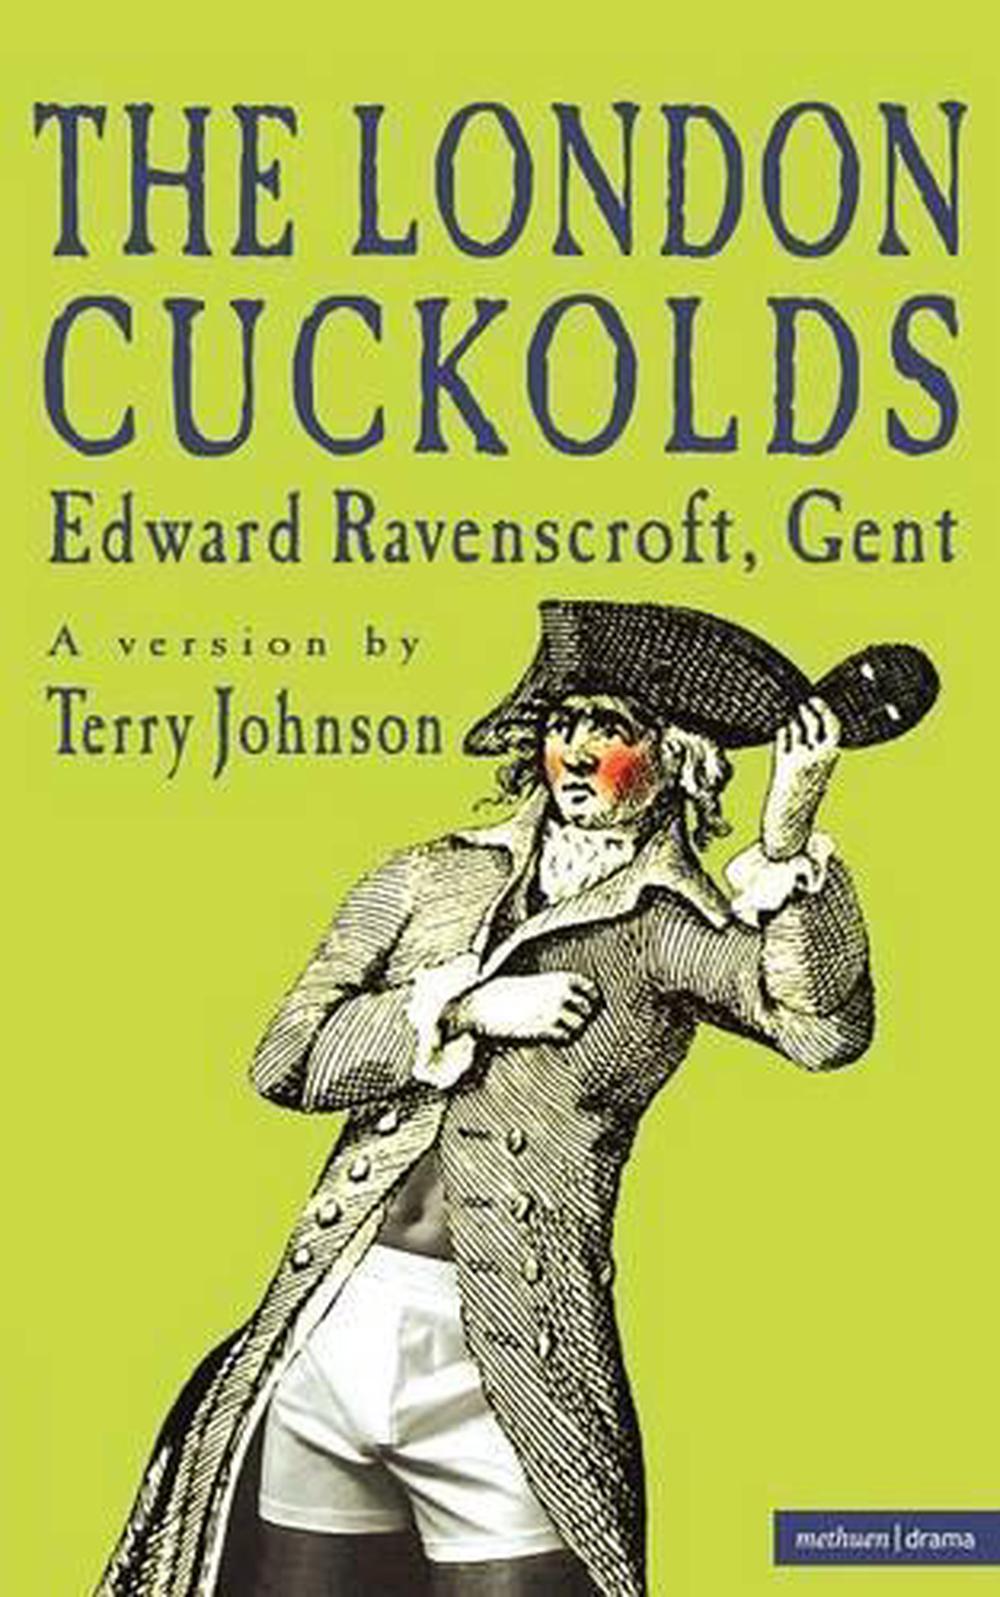 The London Cuckolds By Terry Johnson Paperback Book Free Shipping 